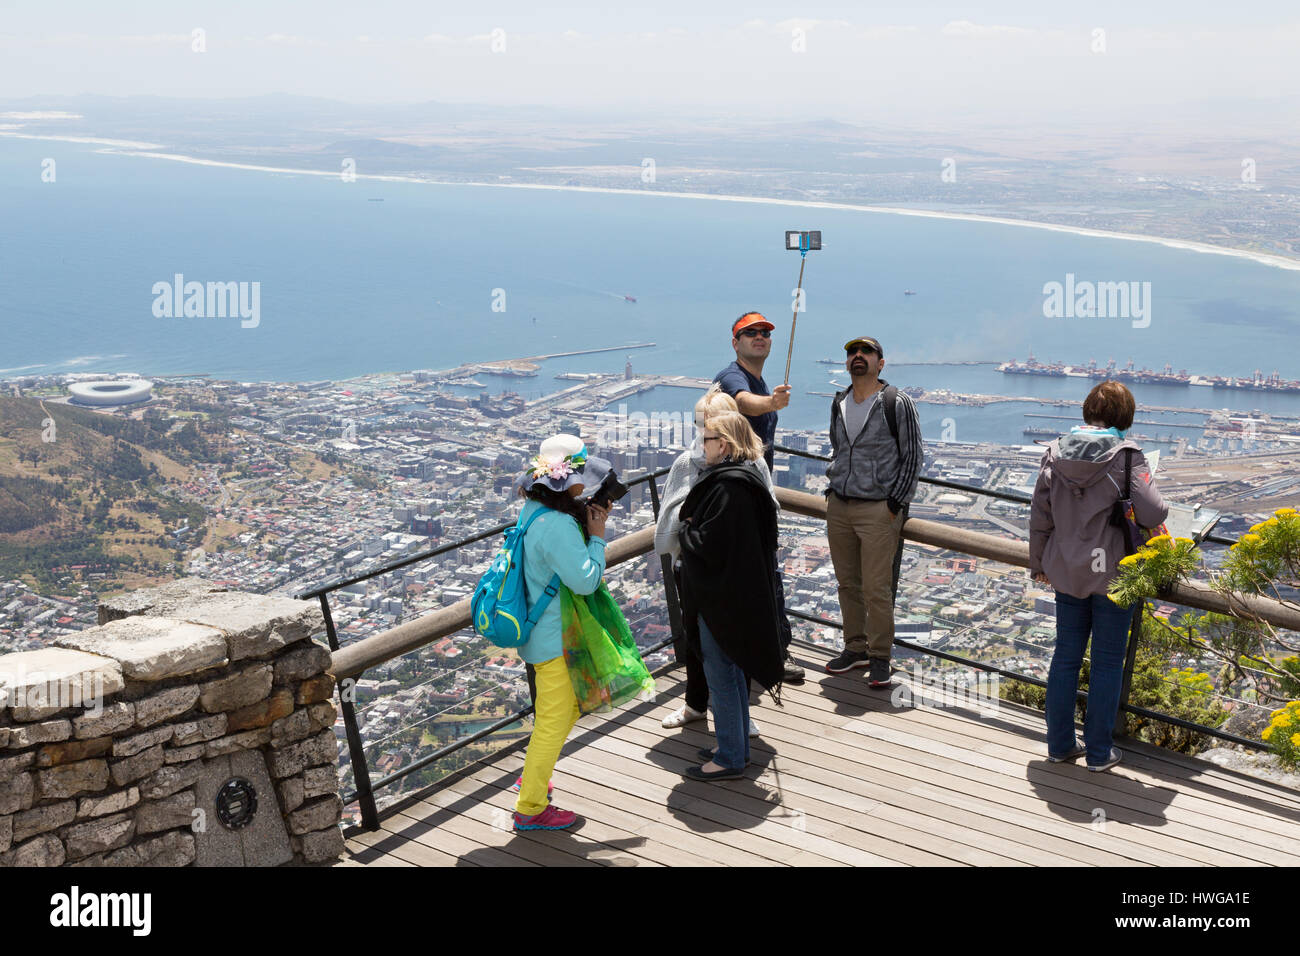 Table Mountain - tourists taking a selfie photo Table Mountain top, Cape town South Africa Stock Photo